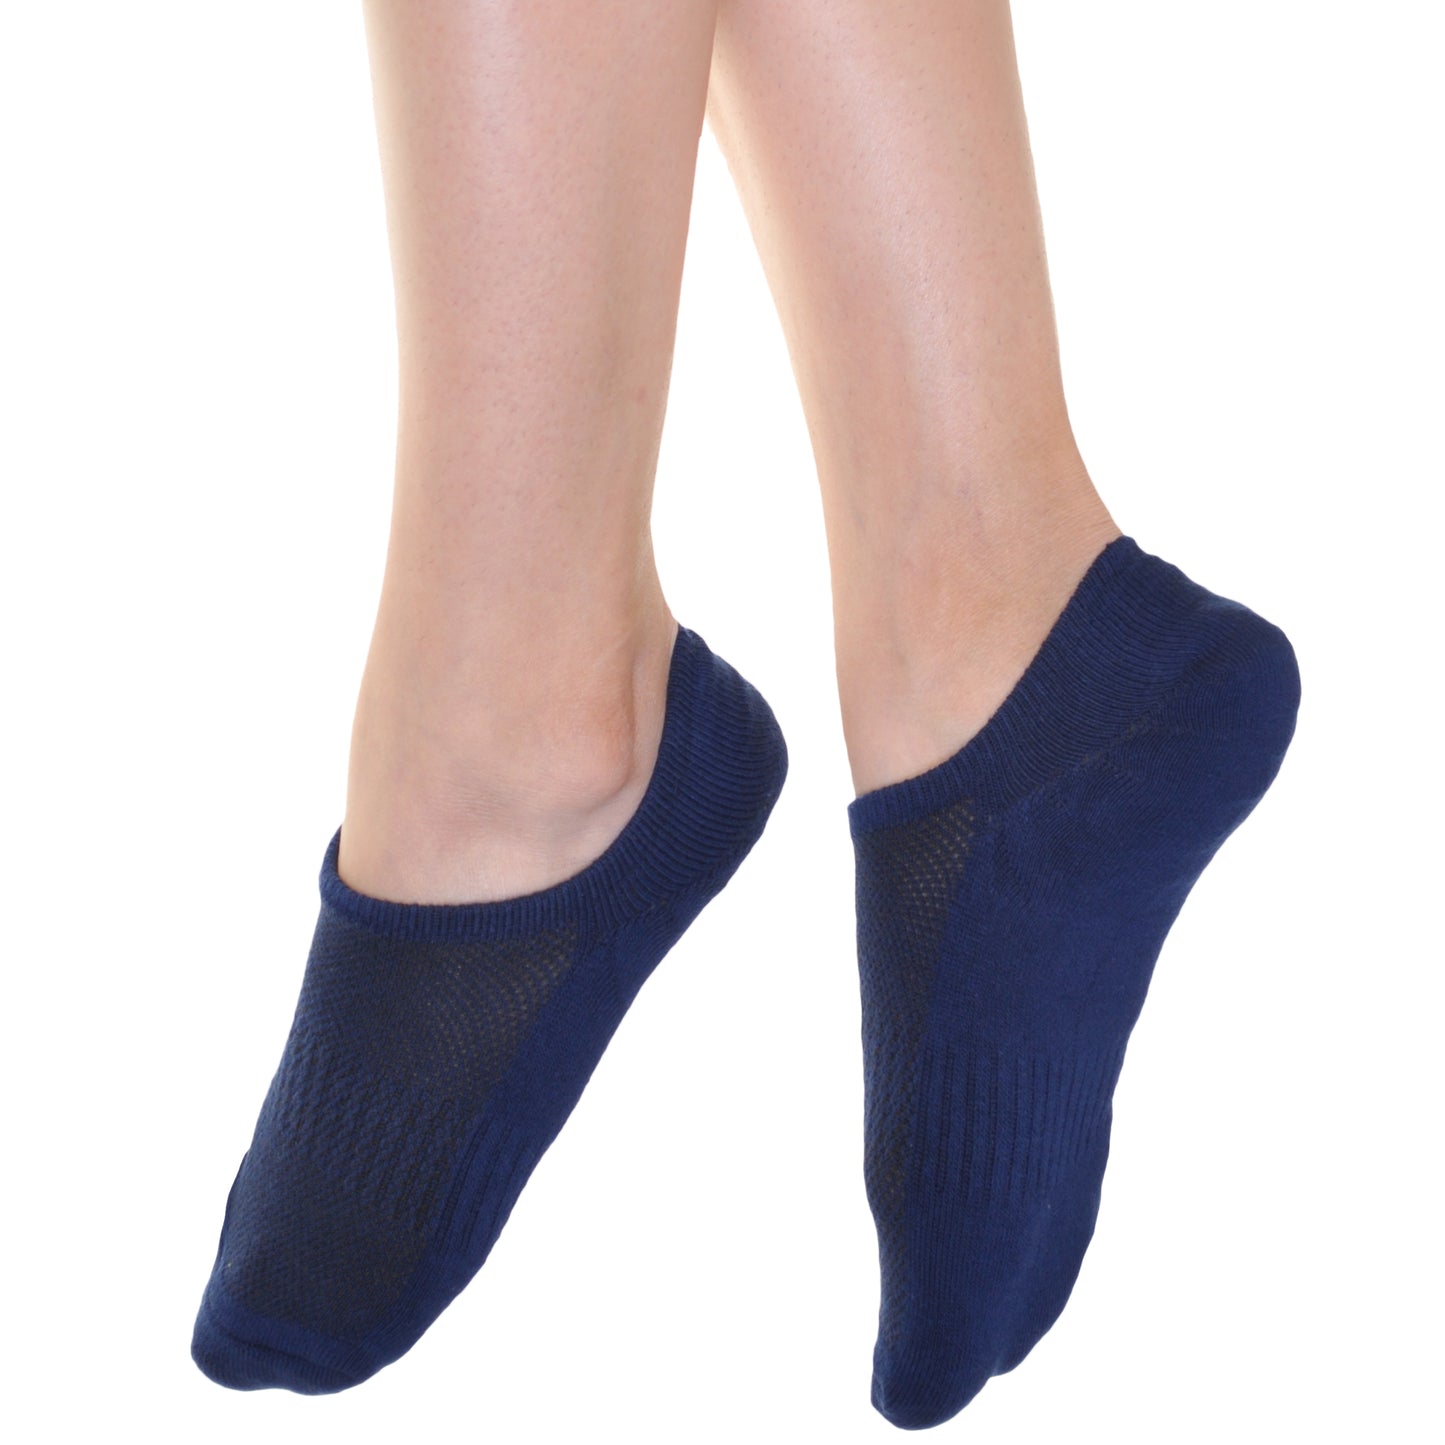 Angelina Unisex Cotton Comfort No-Show Socks With Silicone Heel Grip (12-Pairs), #XTSOCK